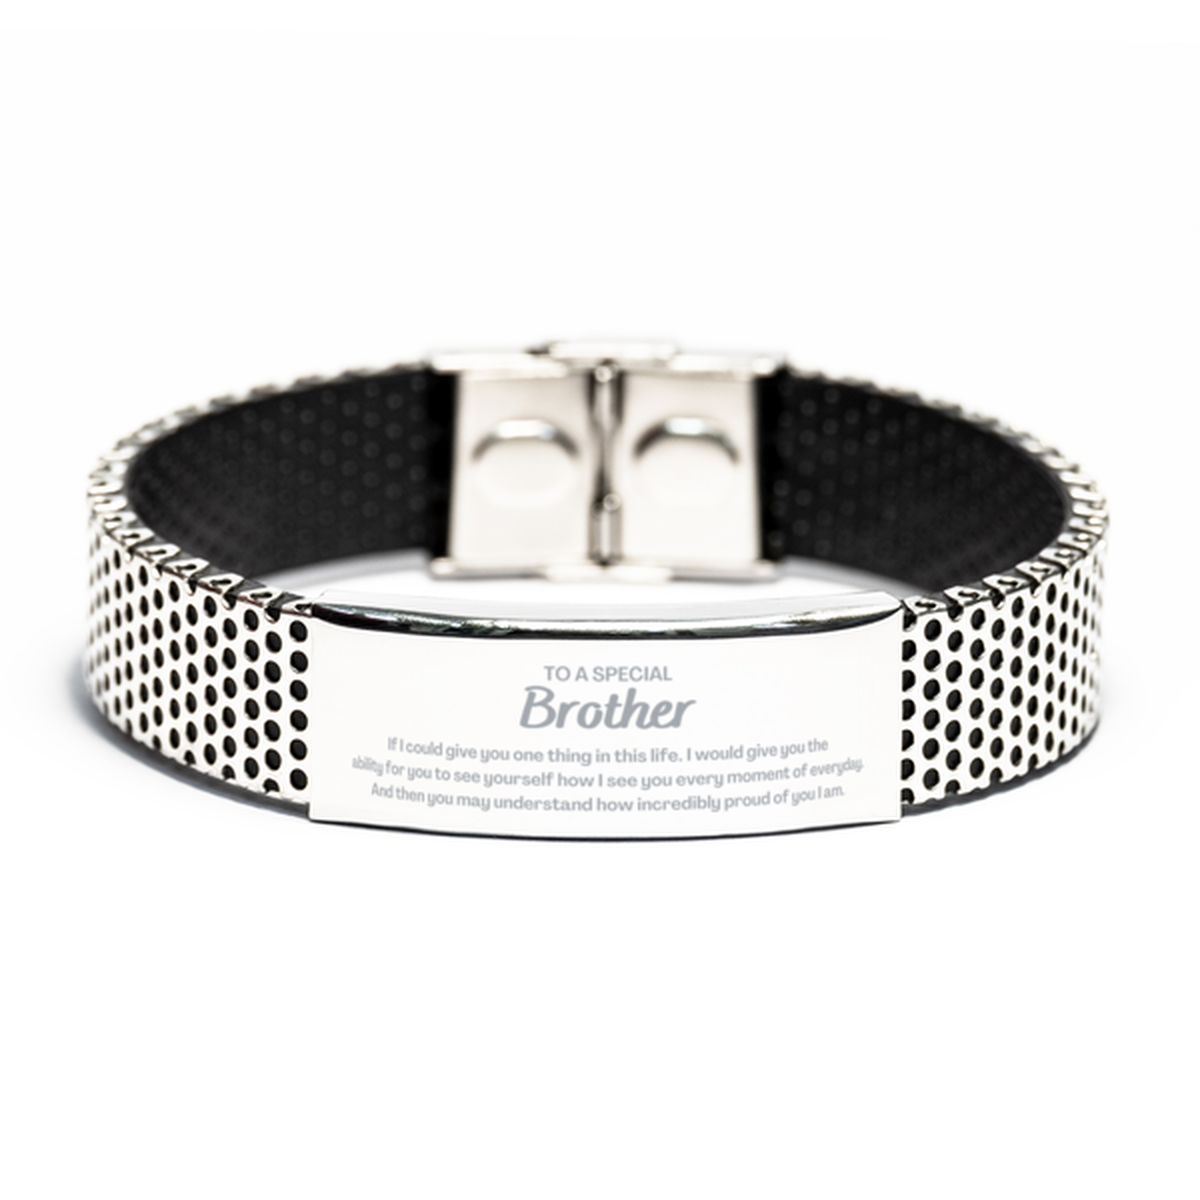 To My Brother Stainless Steel Bracelet, Gifts For Brother Engraved, Inspirational Gifts for Christmas Birthday, Epic Gifts for Brother To A Special Brother how incredibly proud of you I am